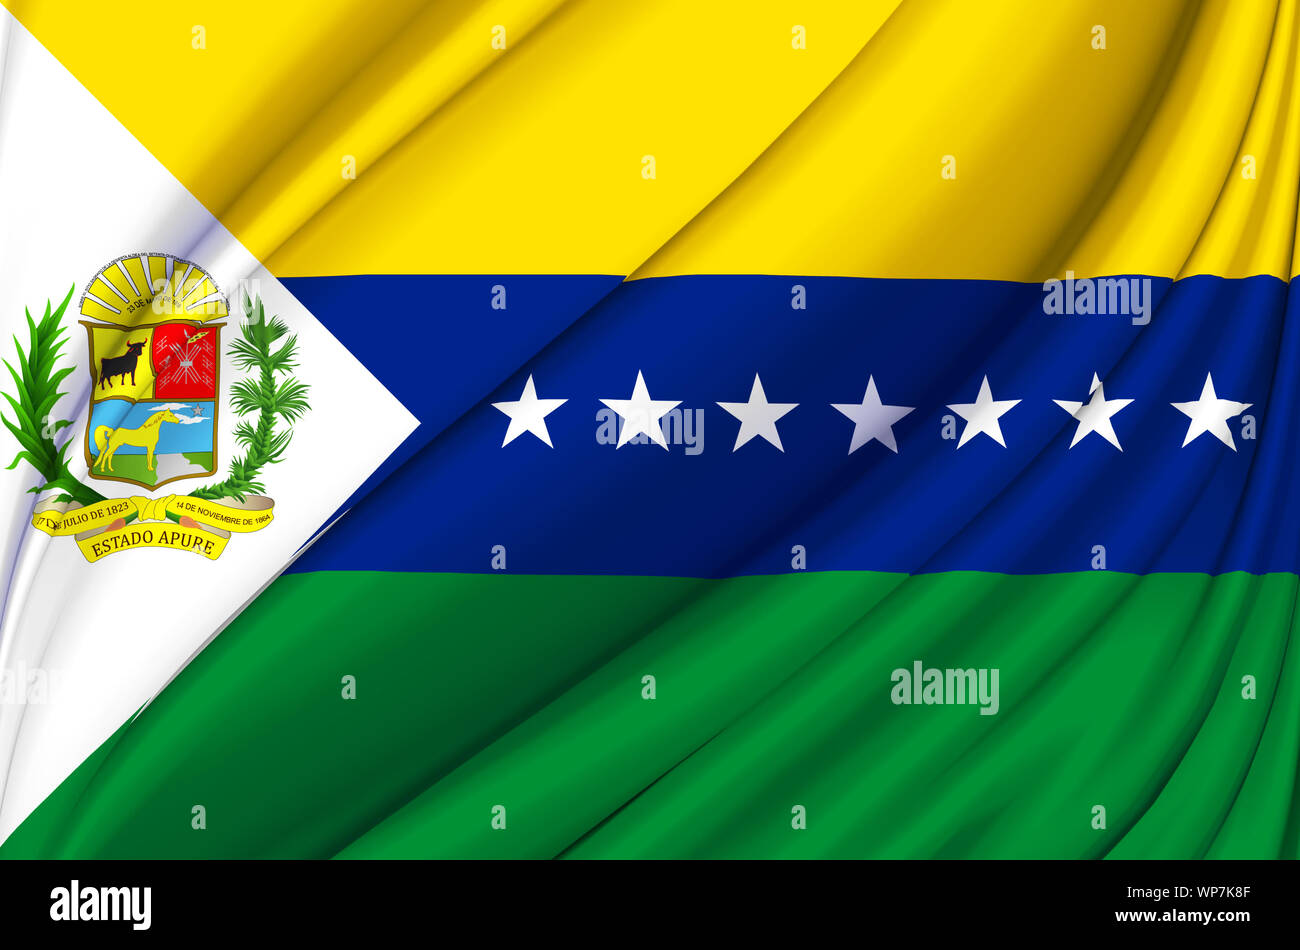 Apure waving flag illustration. Regions of Venezuela. Perfect for background and texture usage. Stock Photo